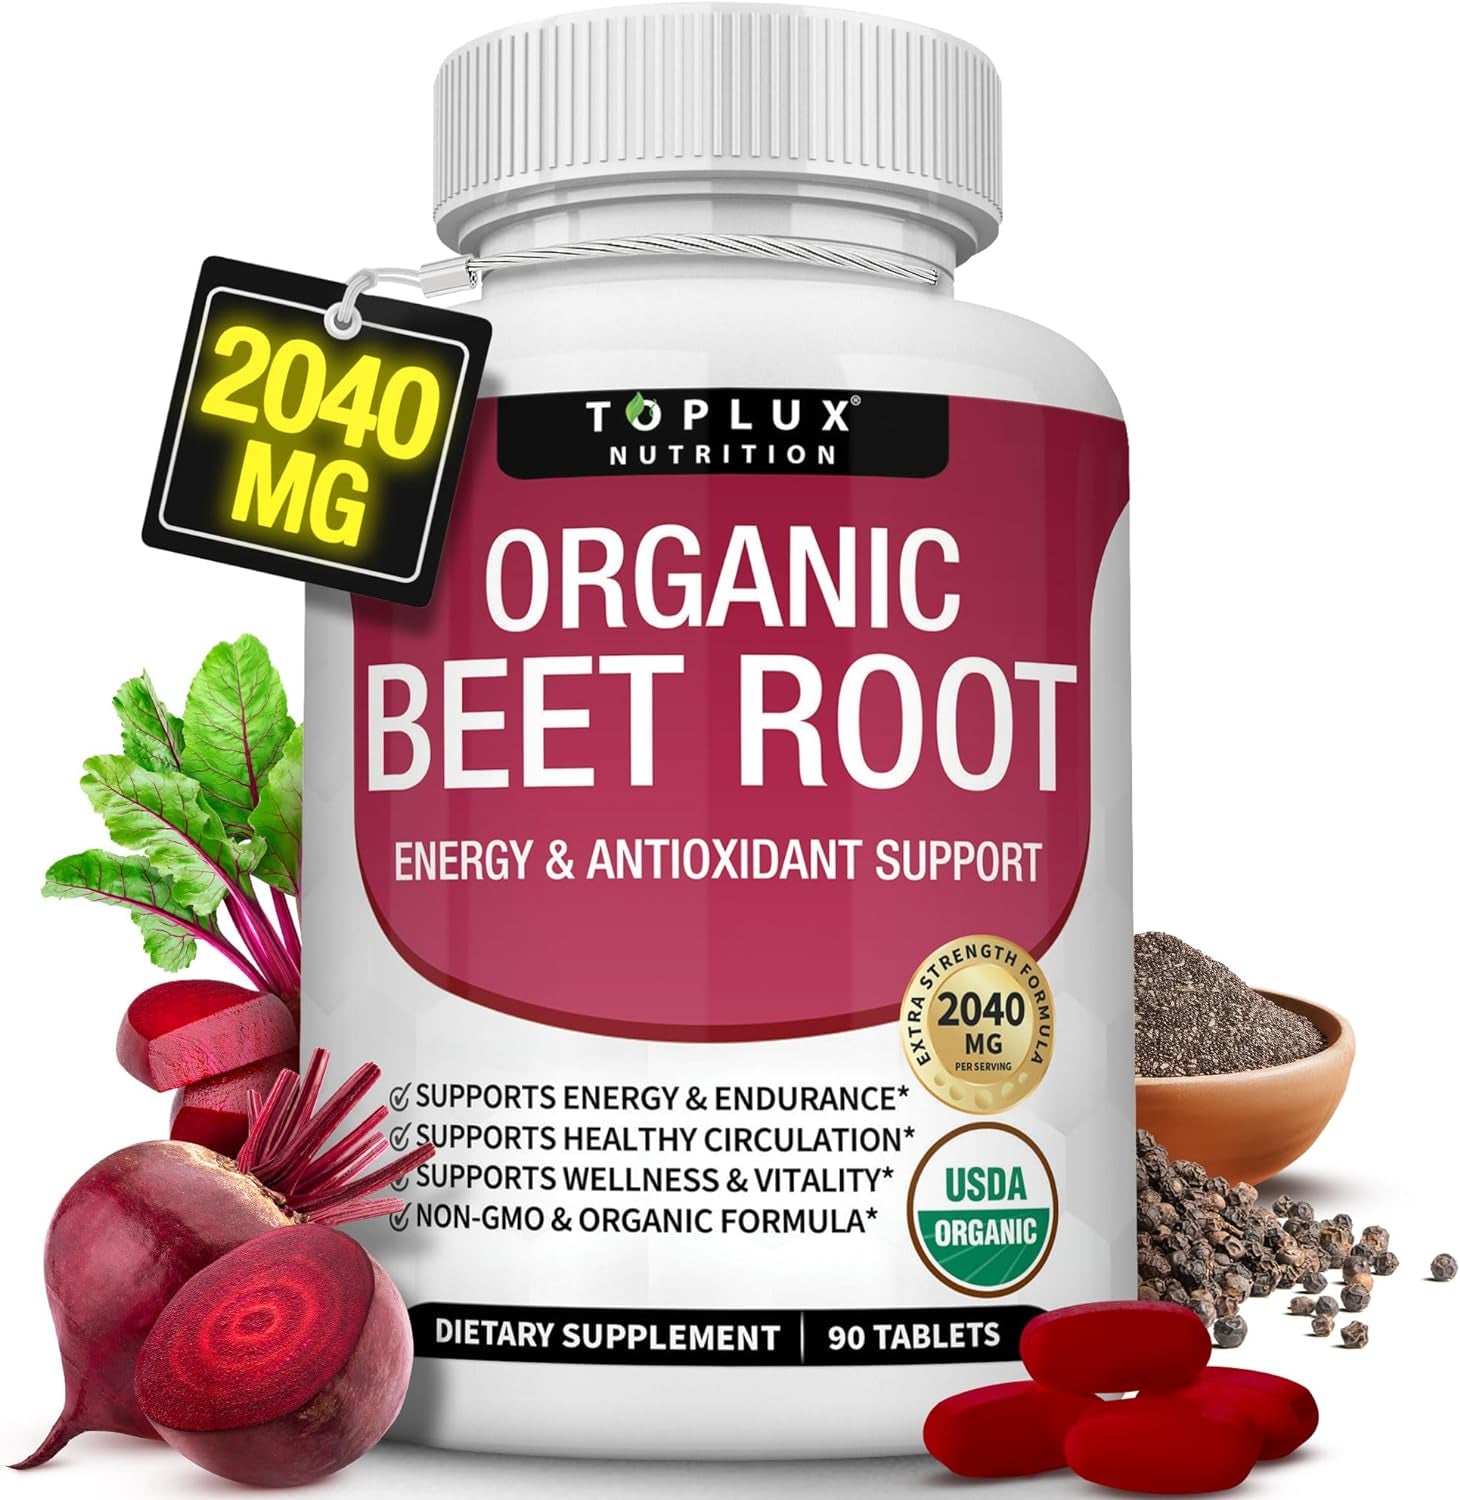 Organic Beet Root Powder Tablets - 2040Mg Natural Nitric Oxide Beets to Support, Energy, Black Pepper Better Absorption, Non-Gmo, for Men Women, 90 Tablets